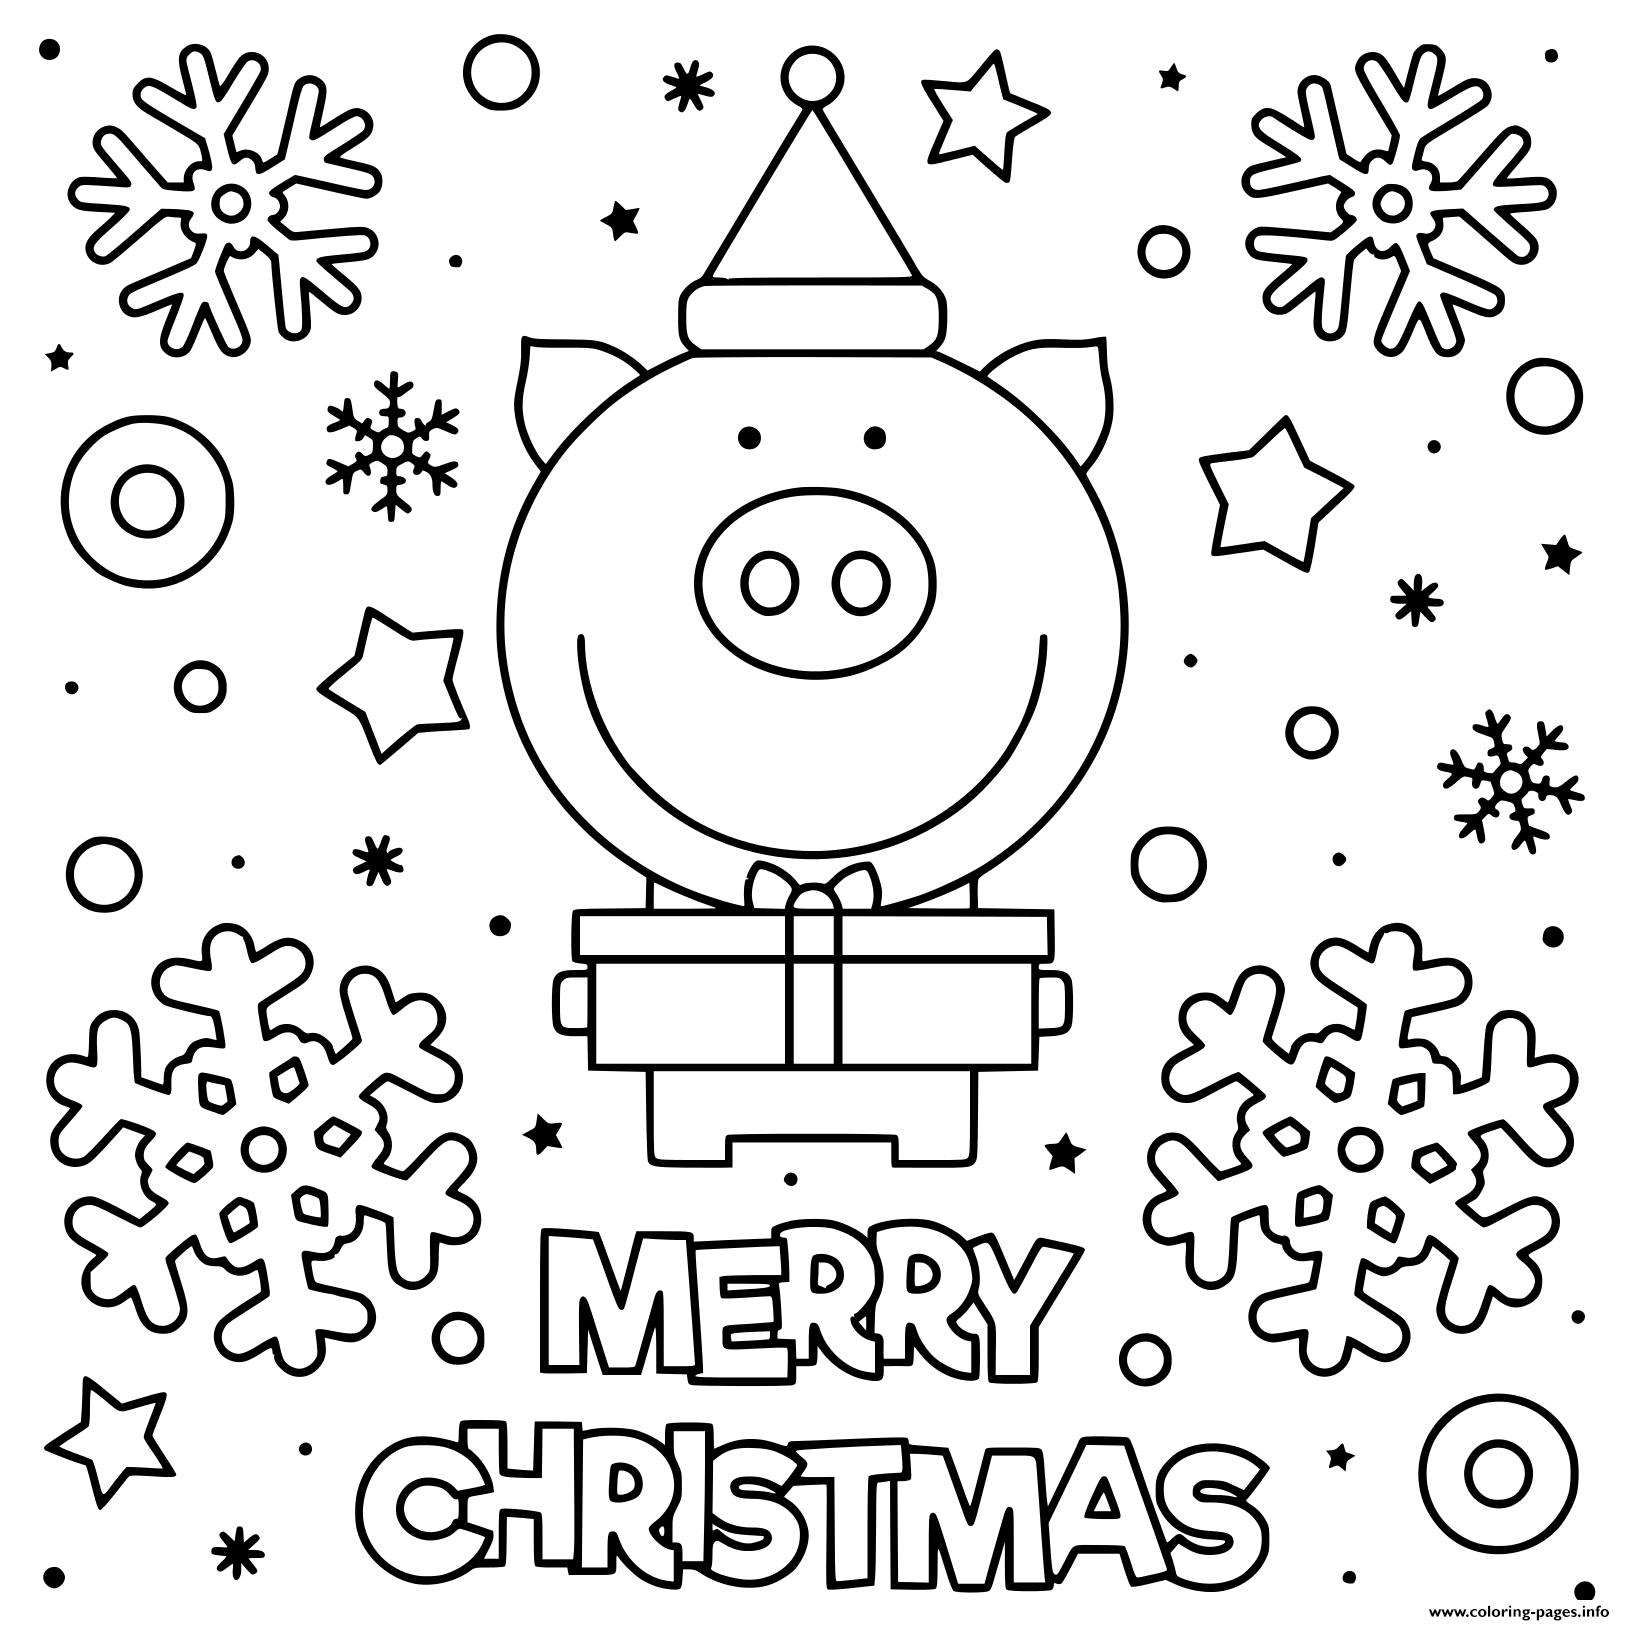 Cute Pig Wish Merry Christmas coloring